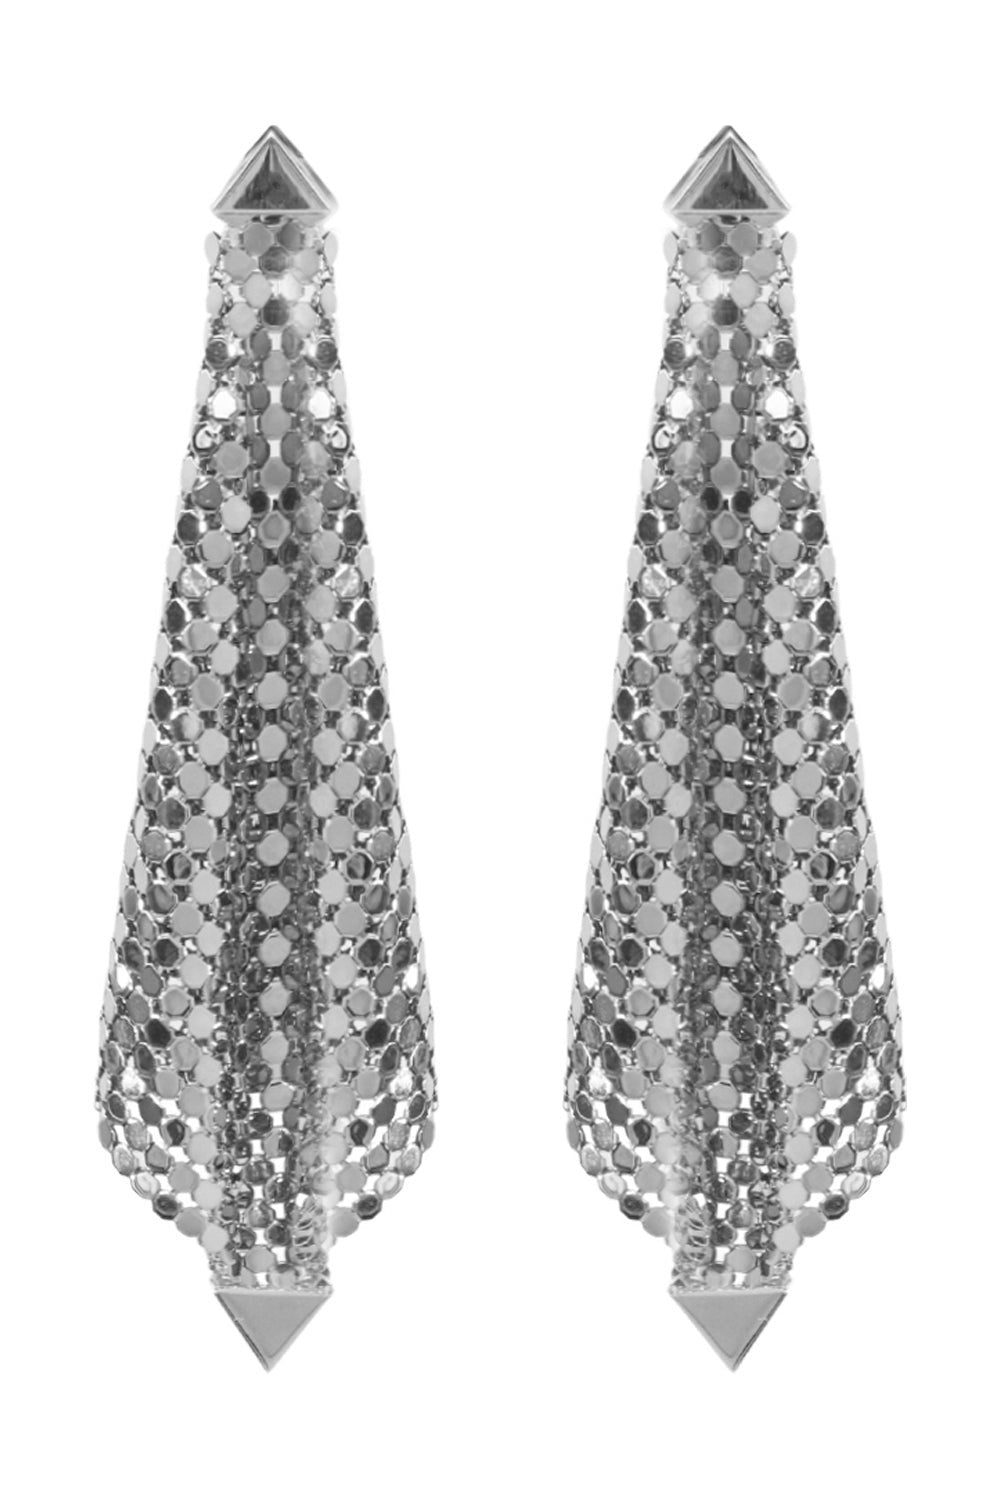 PACO RABANNE ACCESSORIES SILVER PIXEL MESH EARRING | SILVER